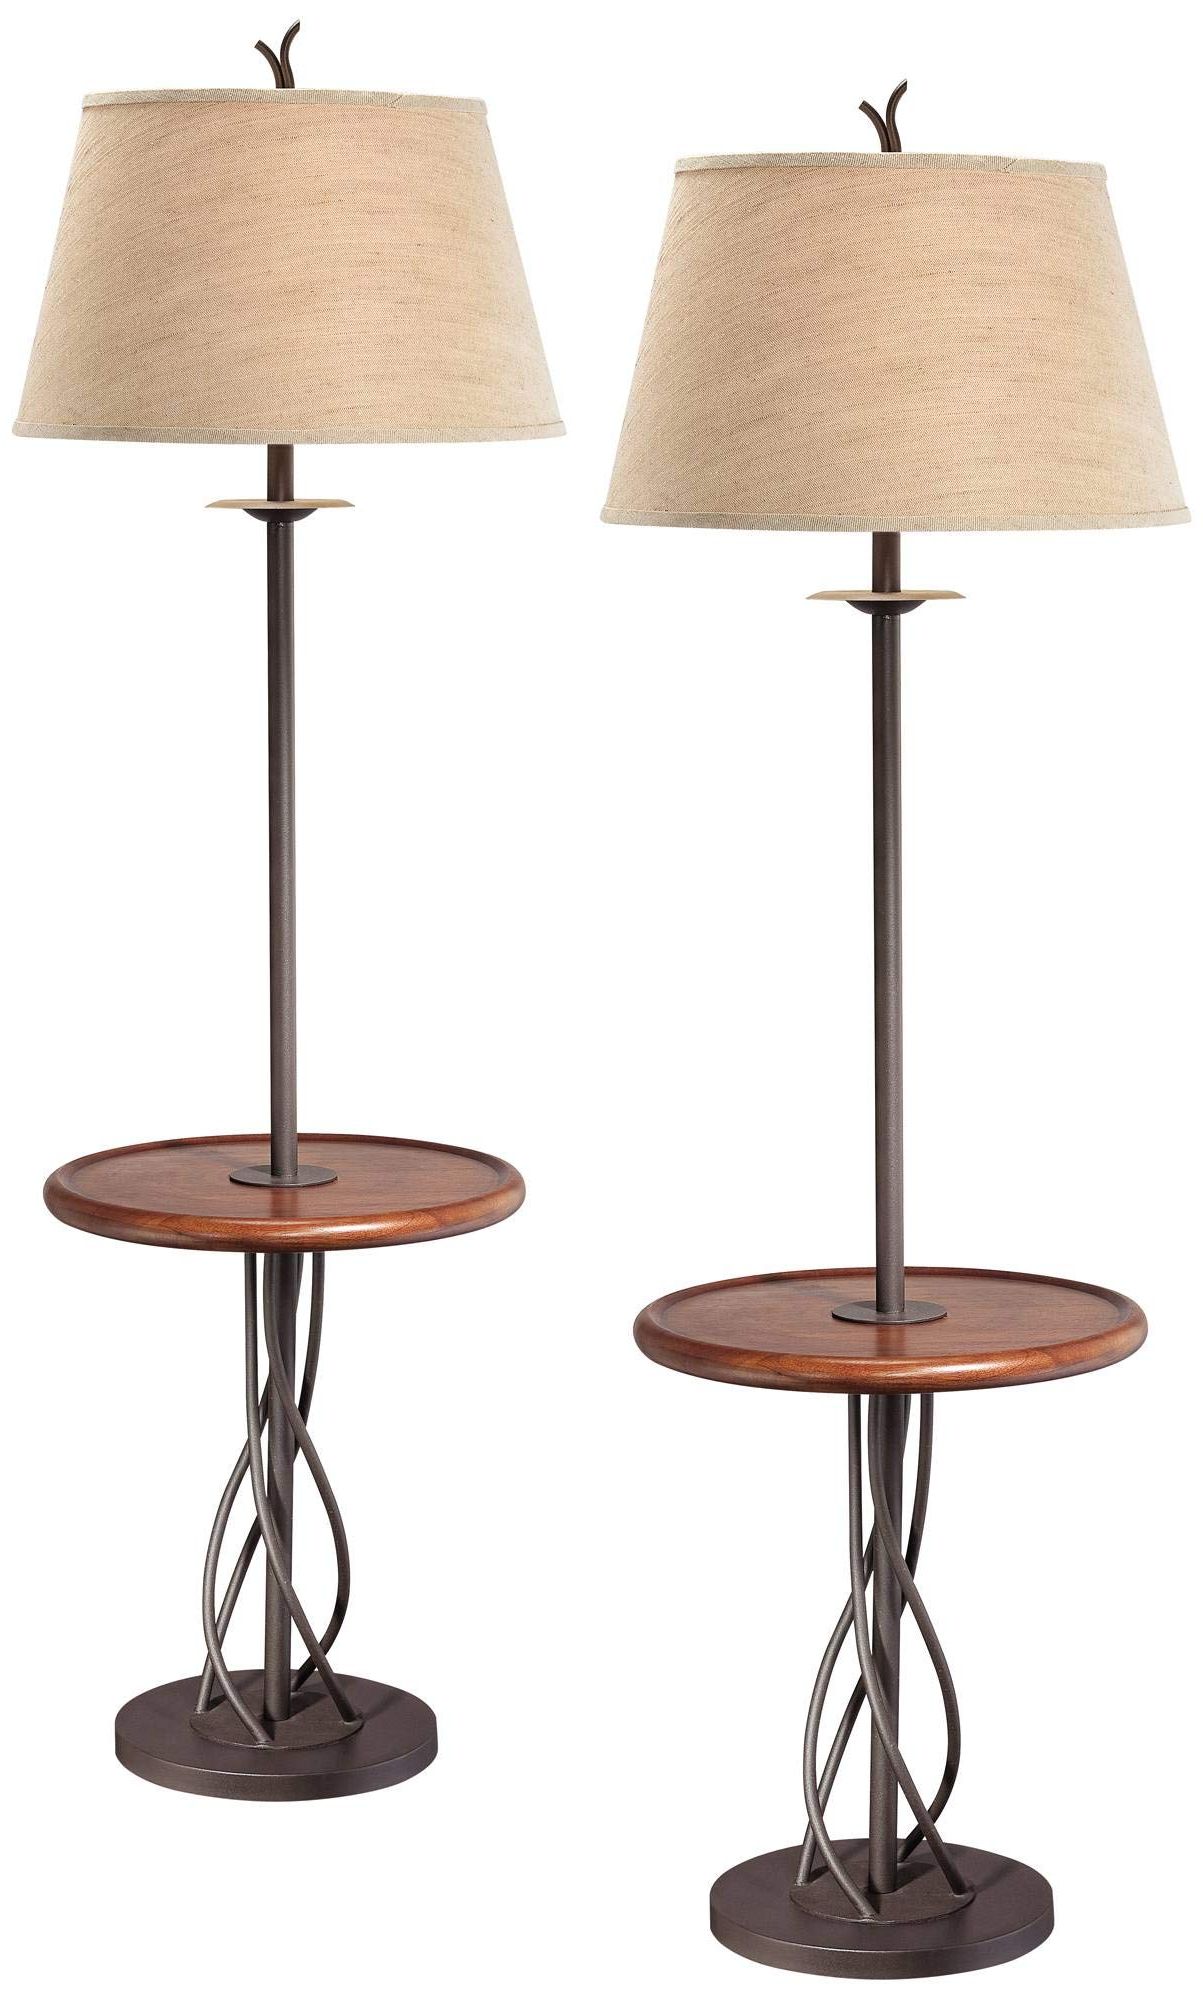 Walnut Standing Lamps Inside Preferred Franklin Iron Works Rustic Farmhouse Industrial Standing Floor Lamps  (View 8 of 10)